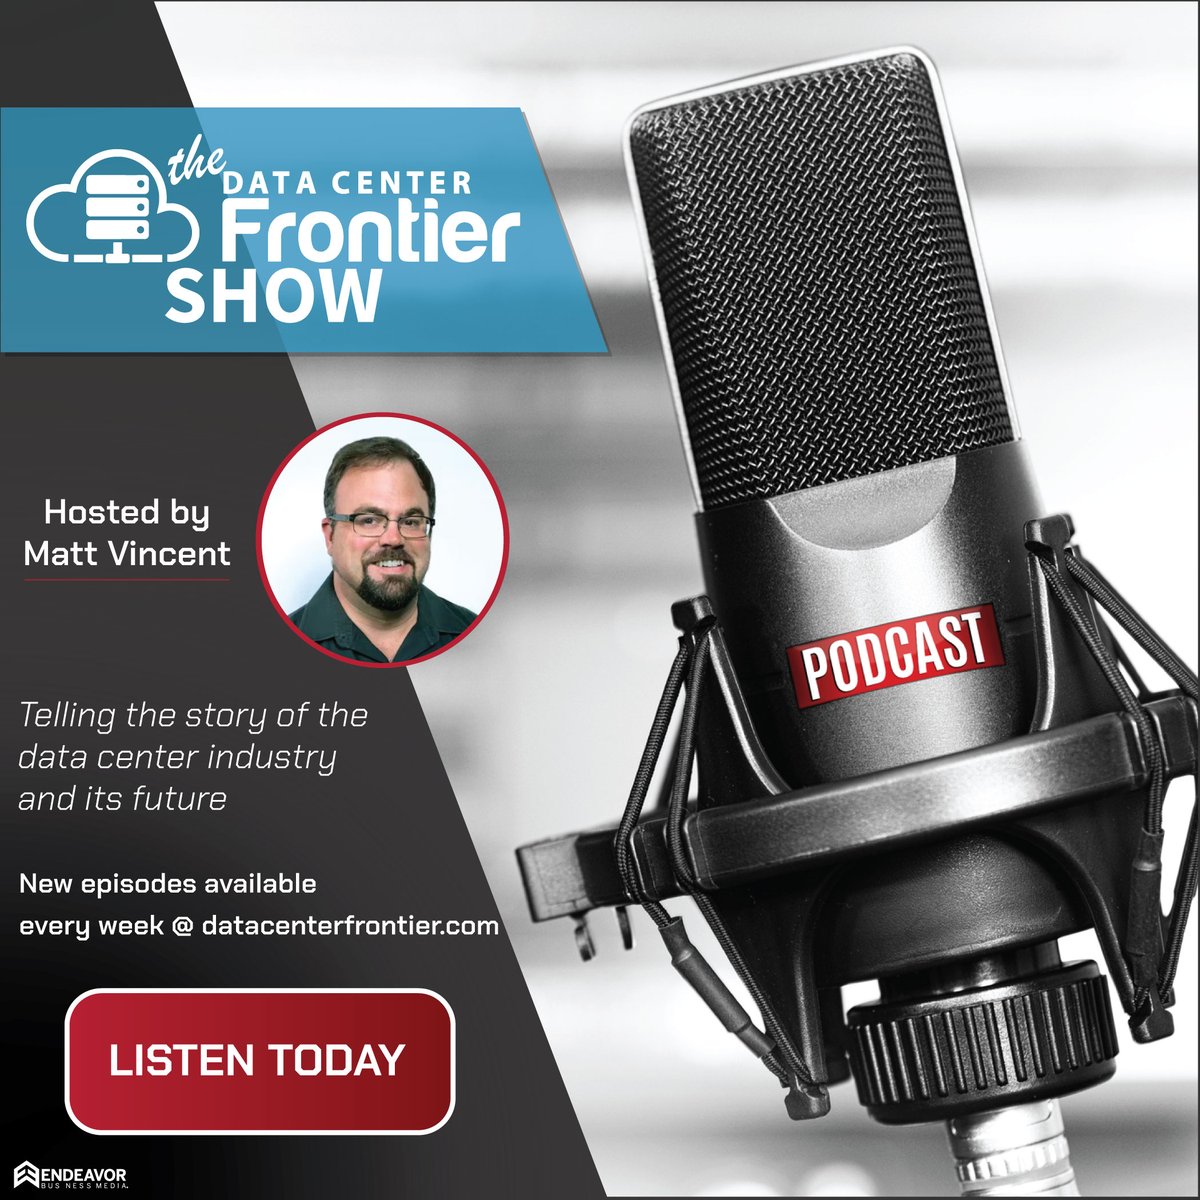 Subscribe to the Data Center Frontier #podcast on #Podbean for interviews charting the future of #power, #cooling and #interconnection for #cloud and #AI #datacenters. #colocation #hyperscale #edge #ML #liquidcooling #fiberoptic #sustainability #IT #ICT datacenterfrontier.com/podcast